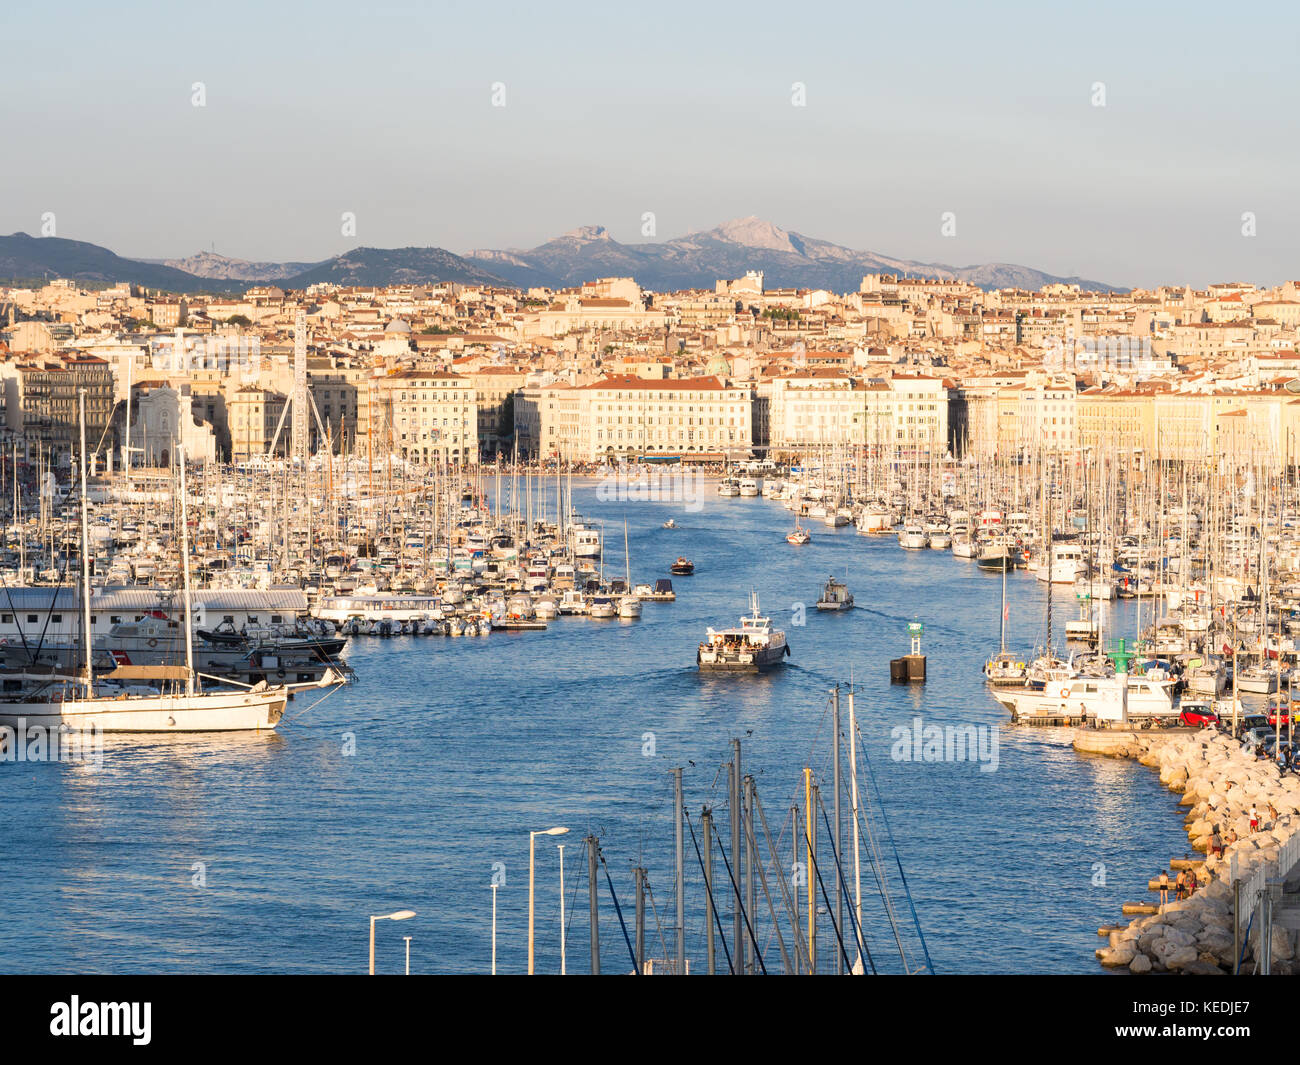 MARSEILLE, FRANCE - AUGUST 07, 2017: The old Vieux Port of Marseille beneath Cathedral of Notre Dame, France, at sunset. Stock Photo